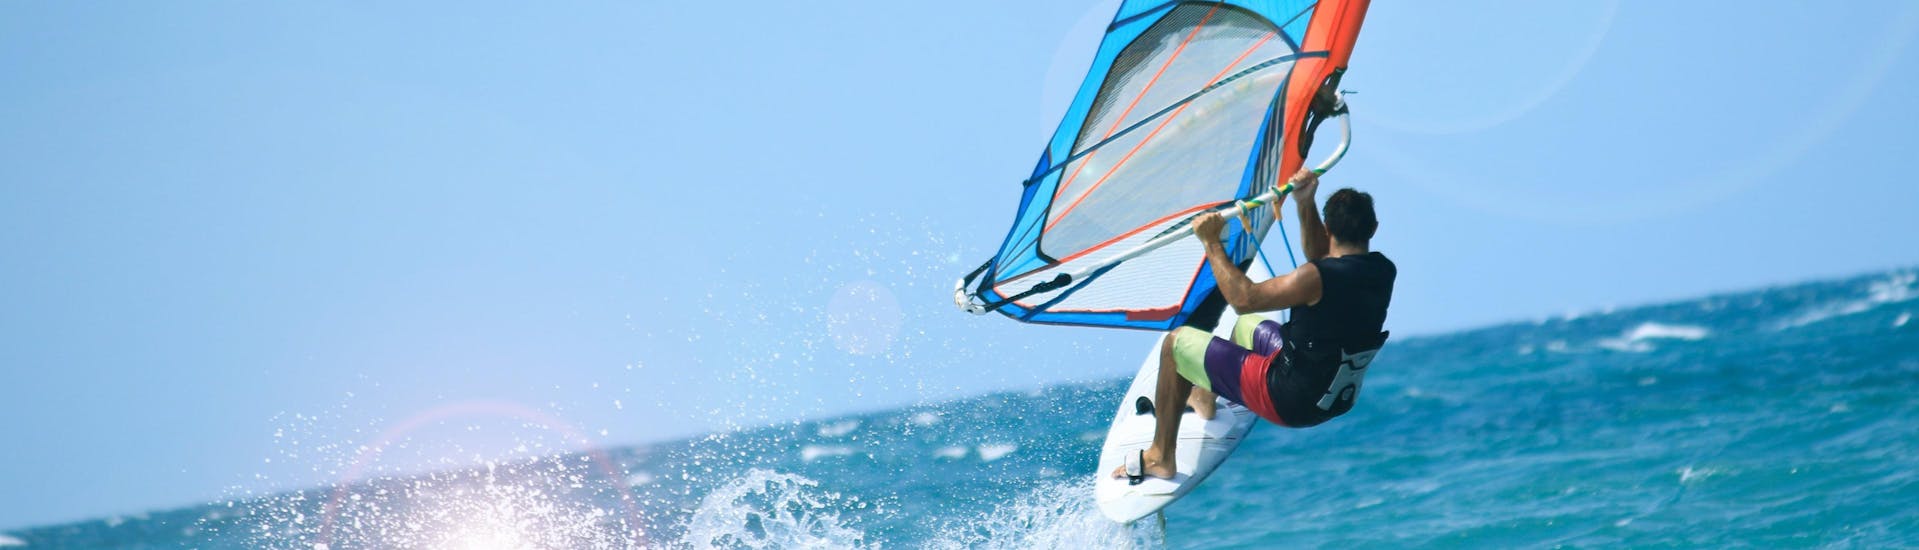 A young man windsurfing in the holiday destination of Lagos.